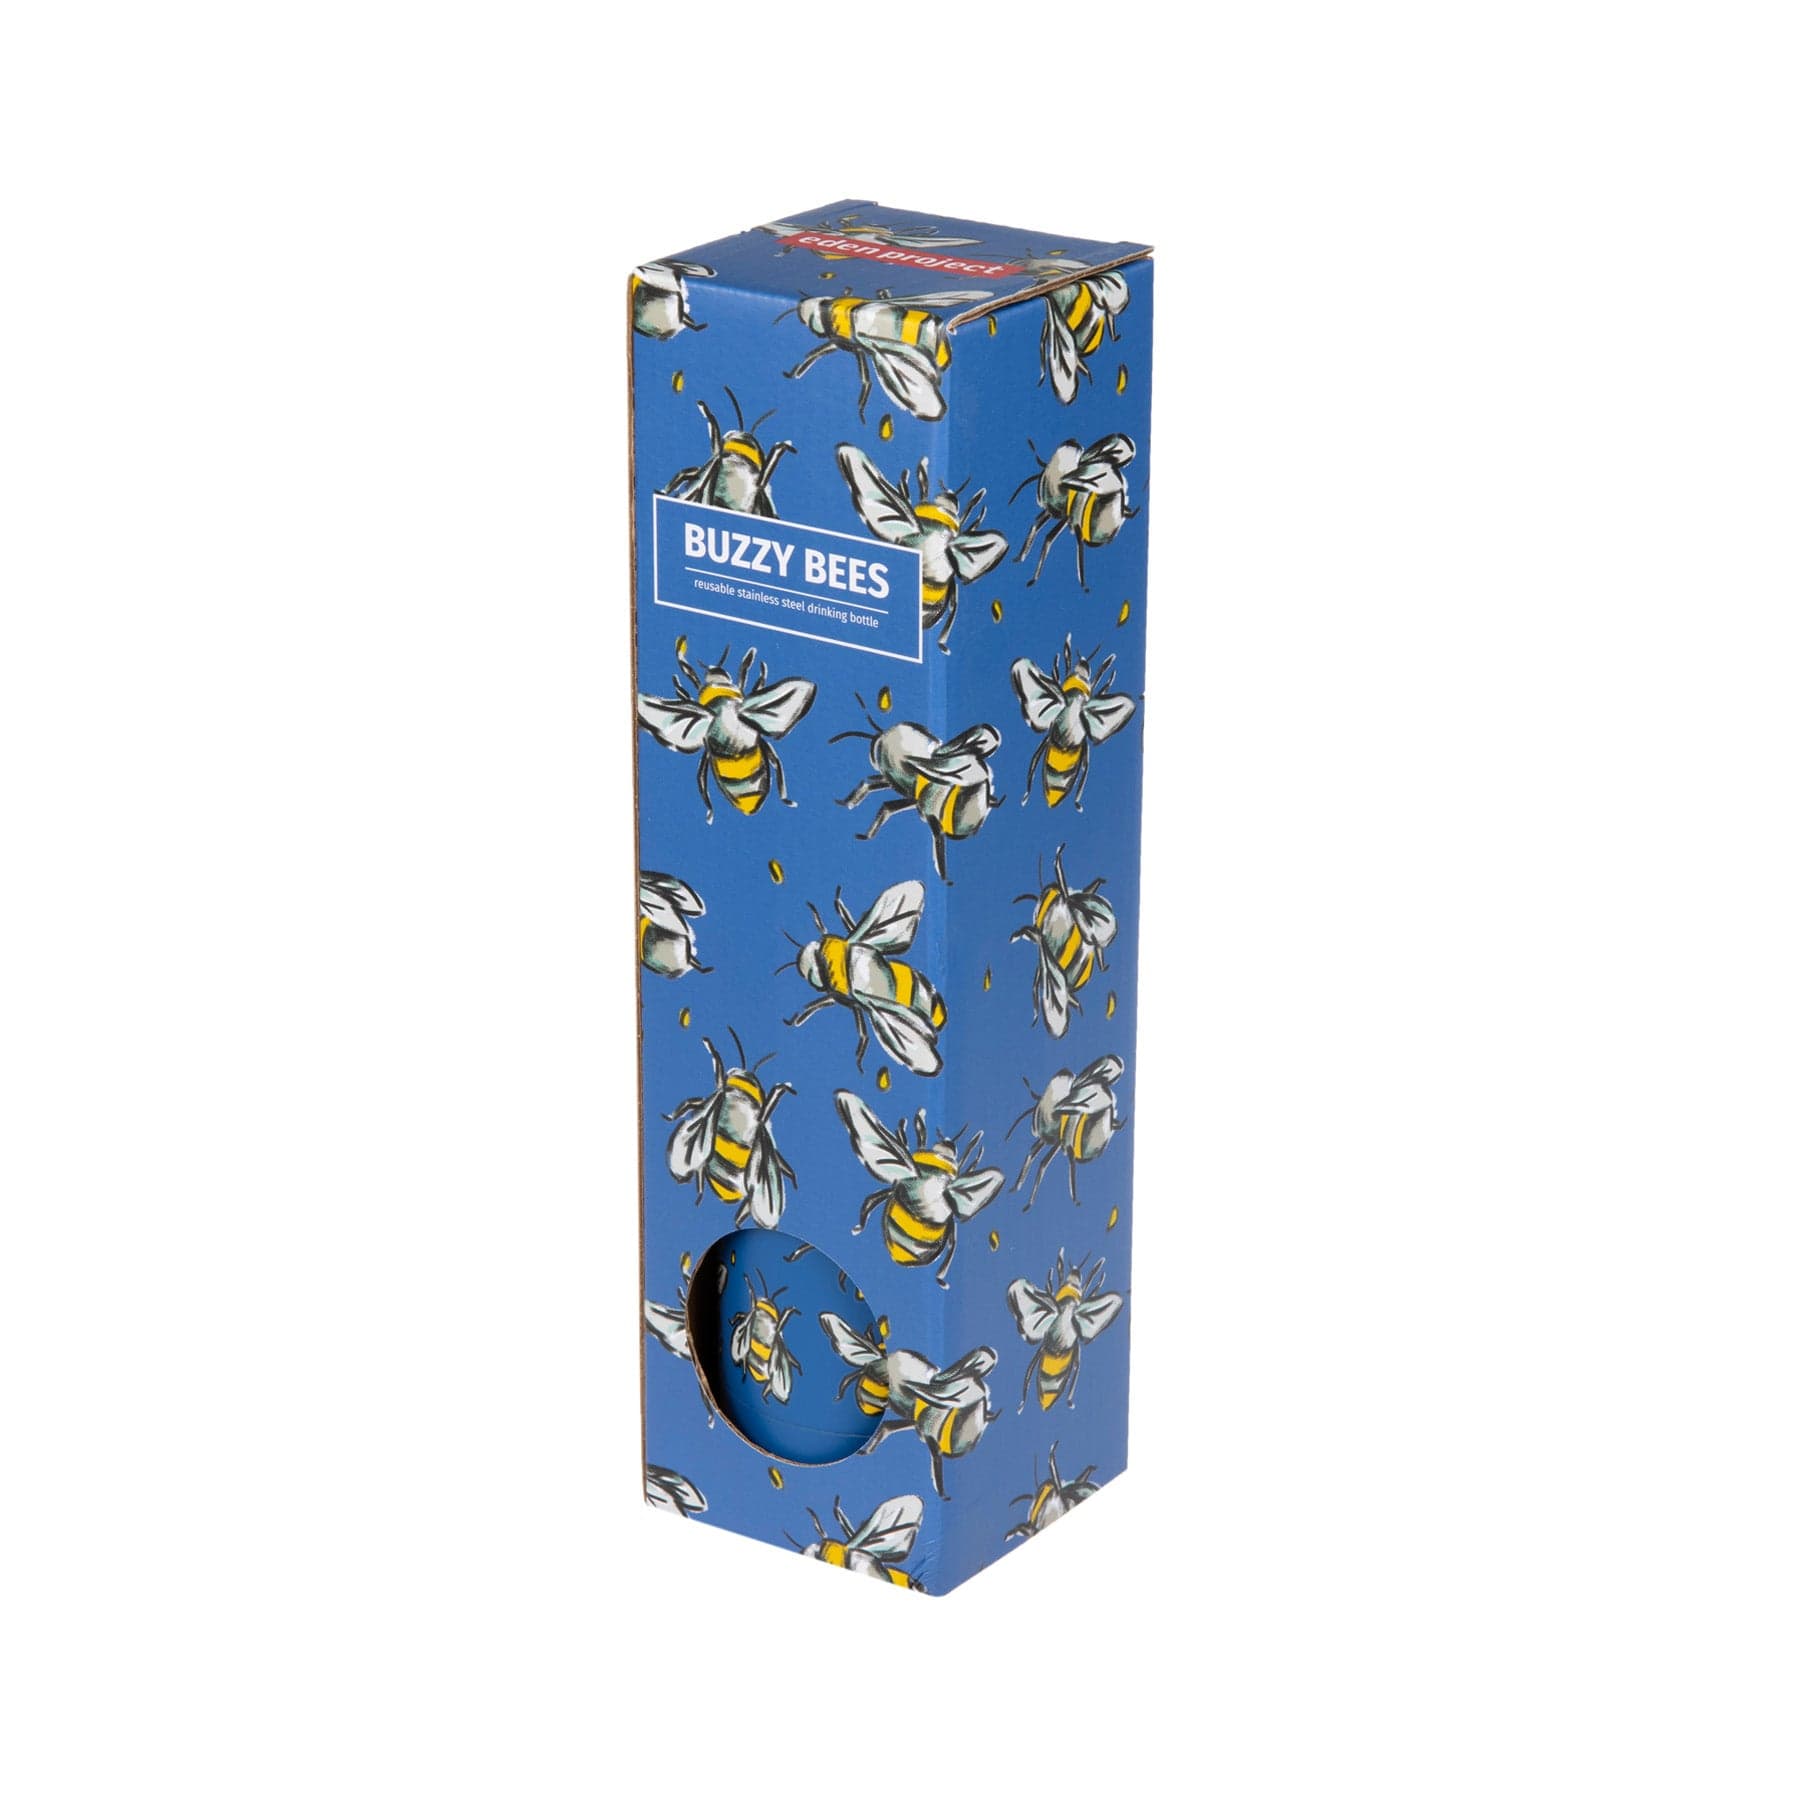 Buzzy bees drinking bottle 500ml